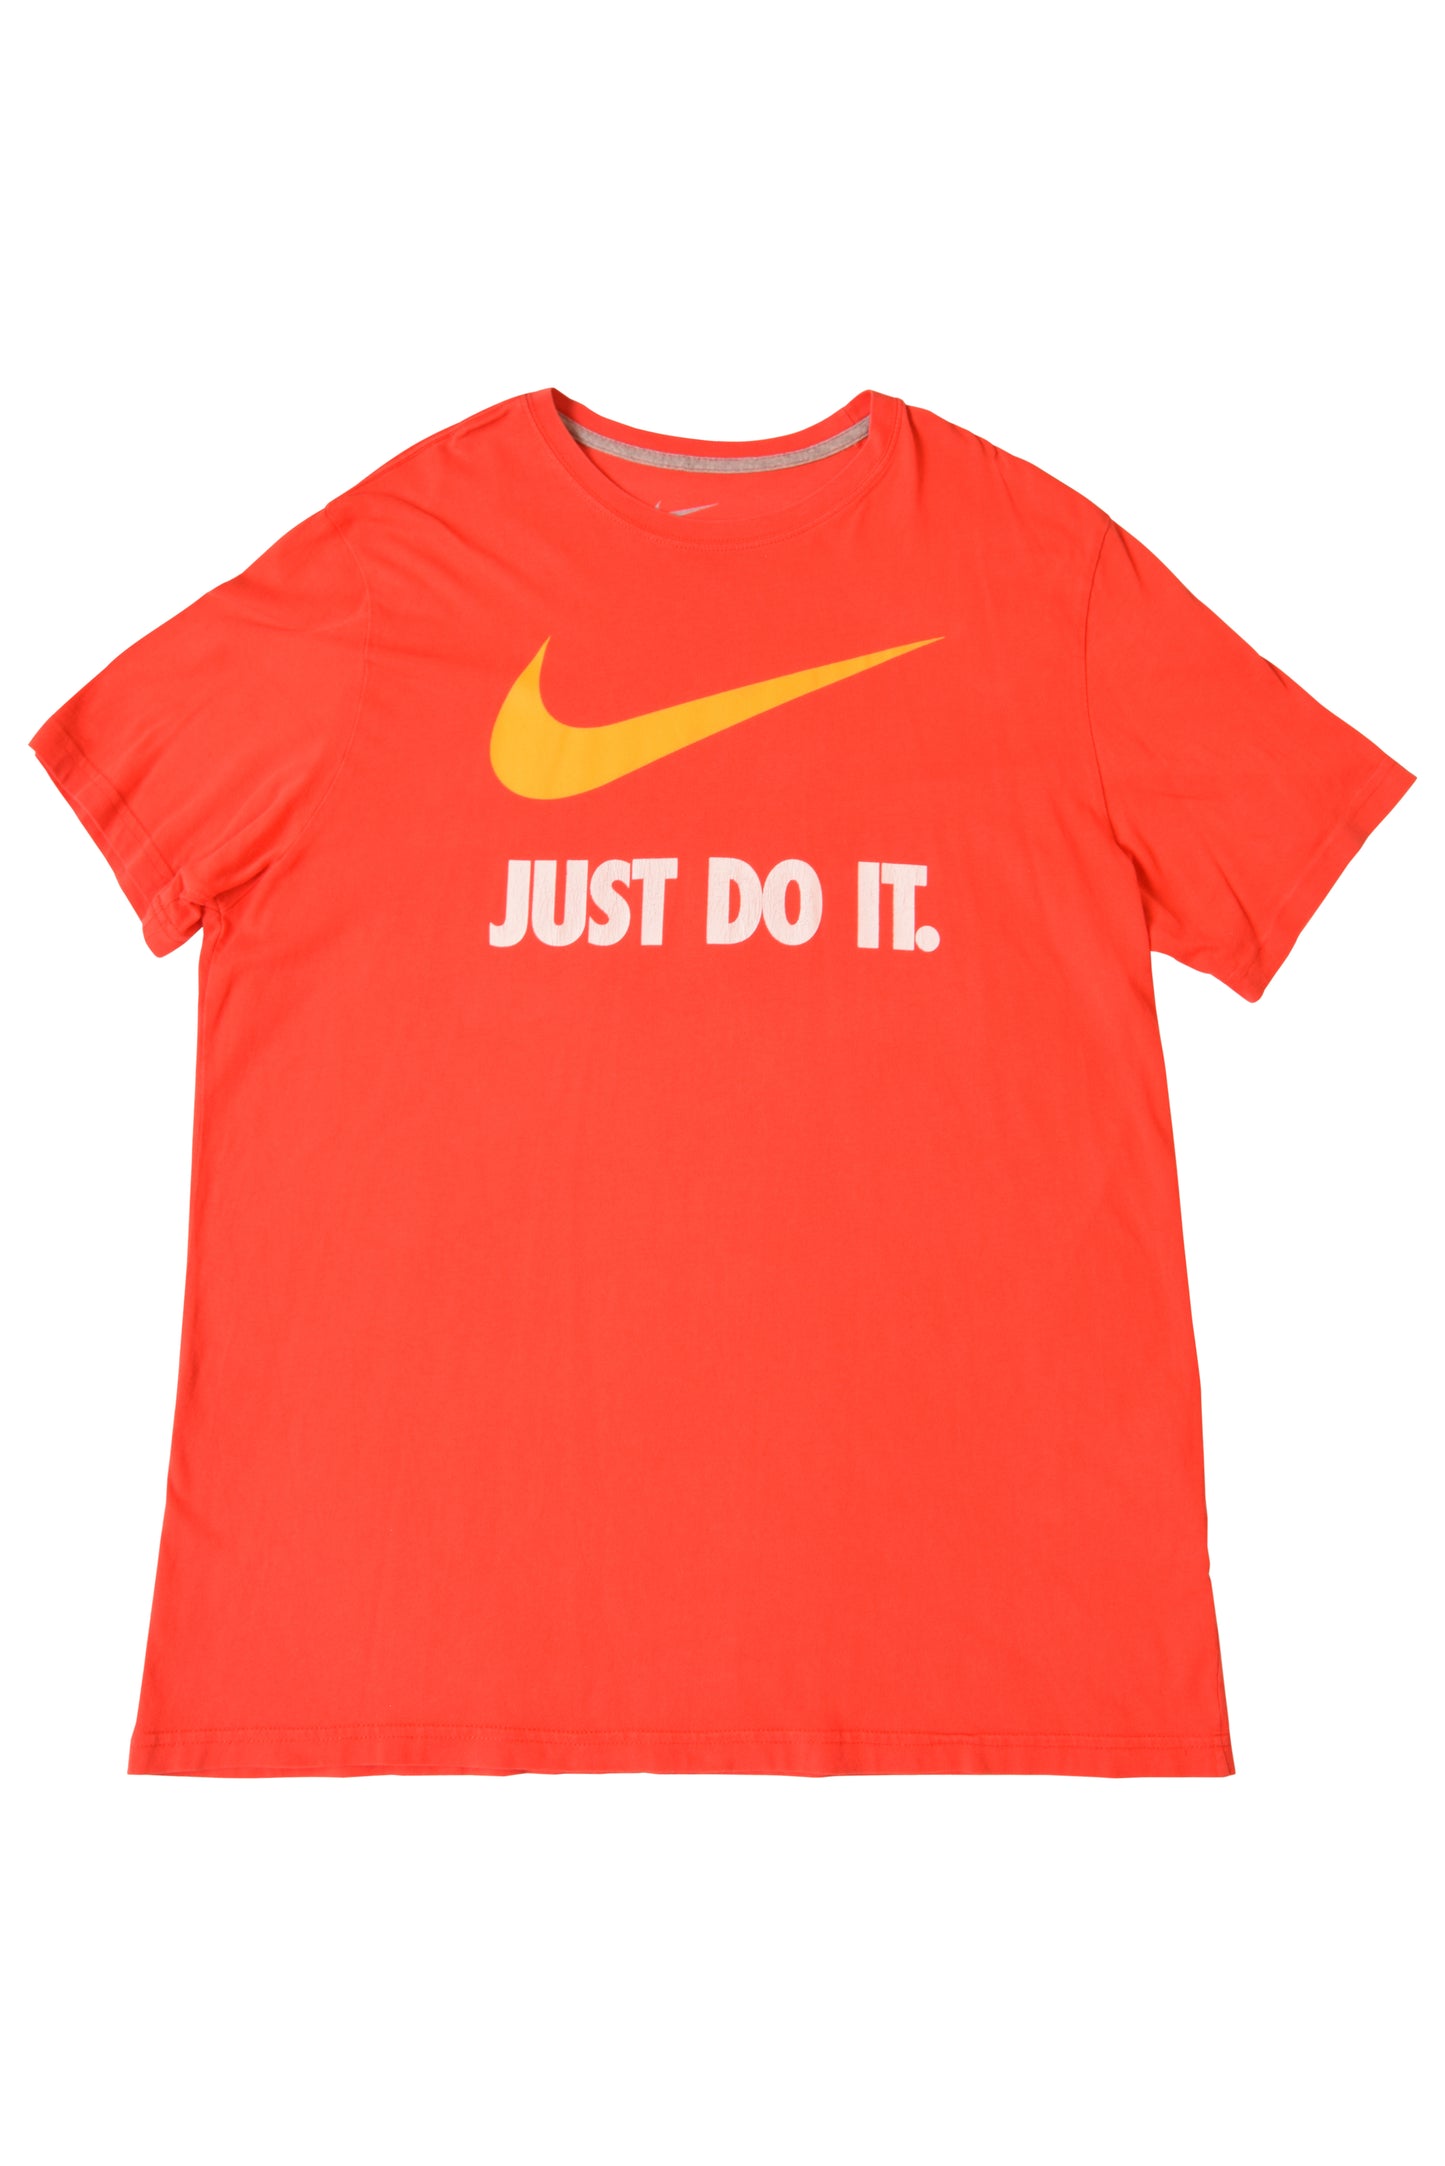 Nike T-Shirt '00s Size XL Regular Fit Red Just do it